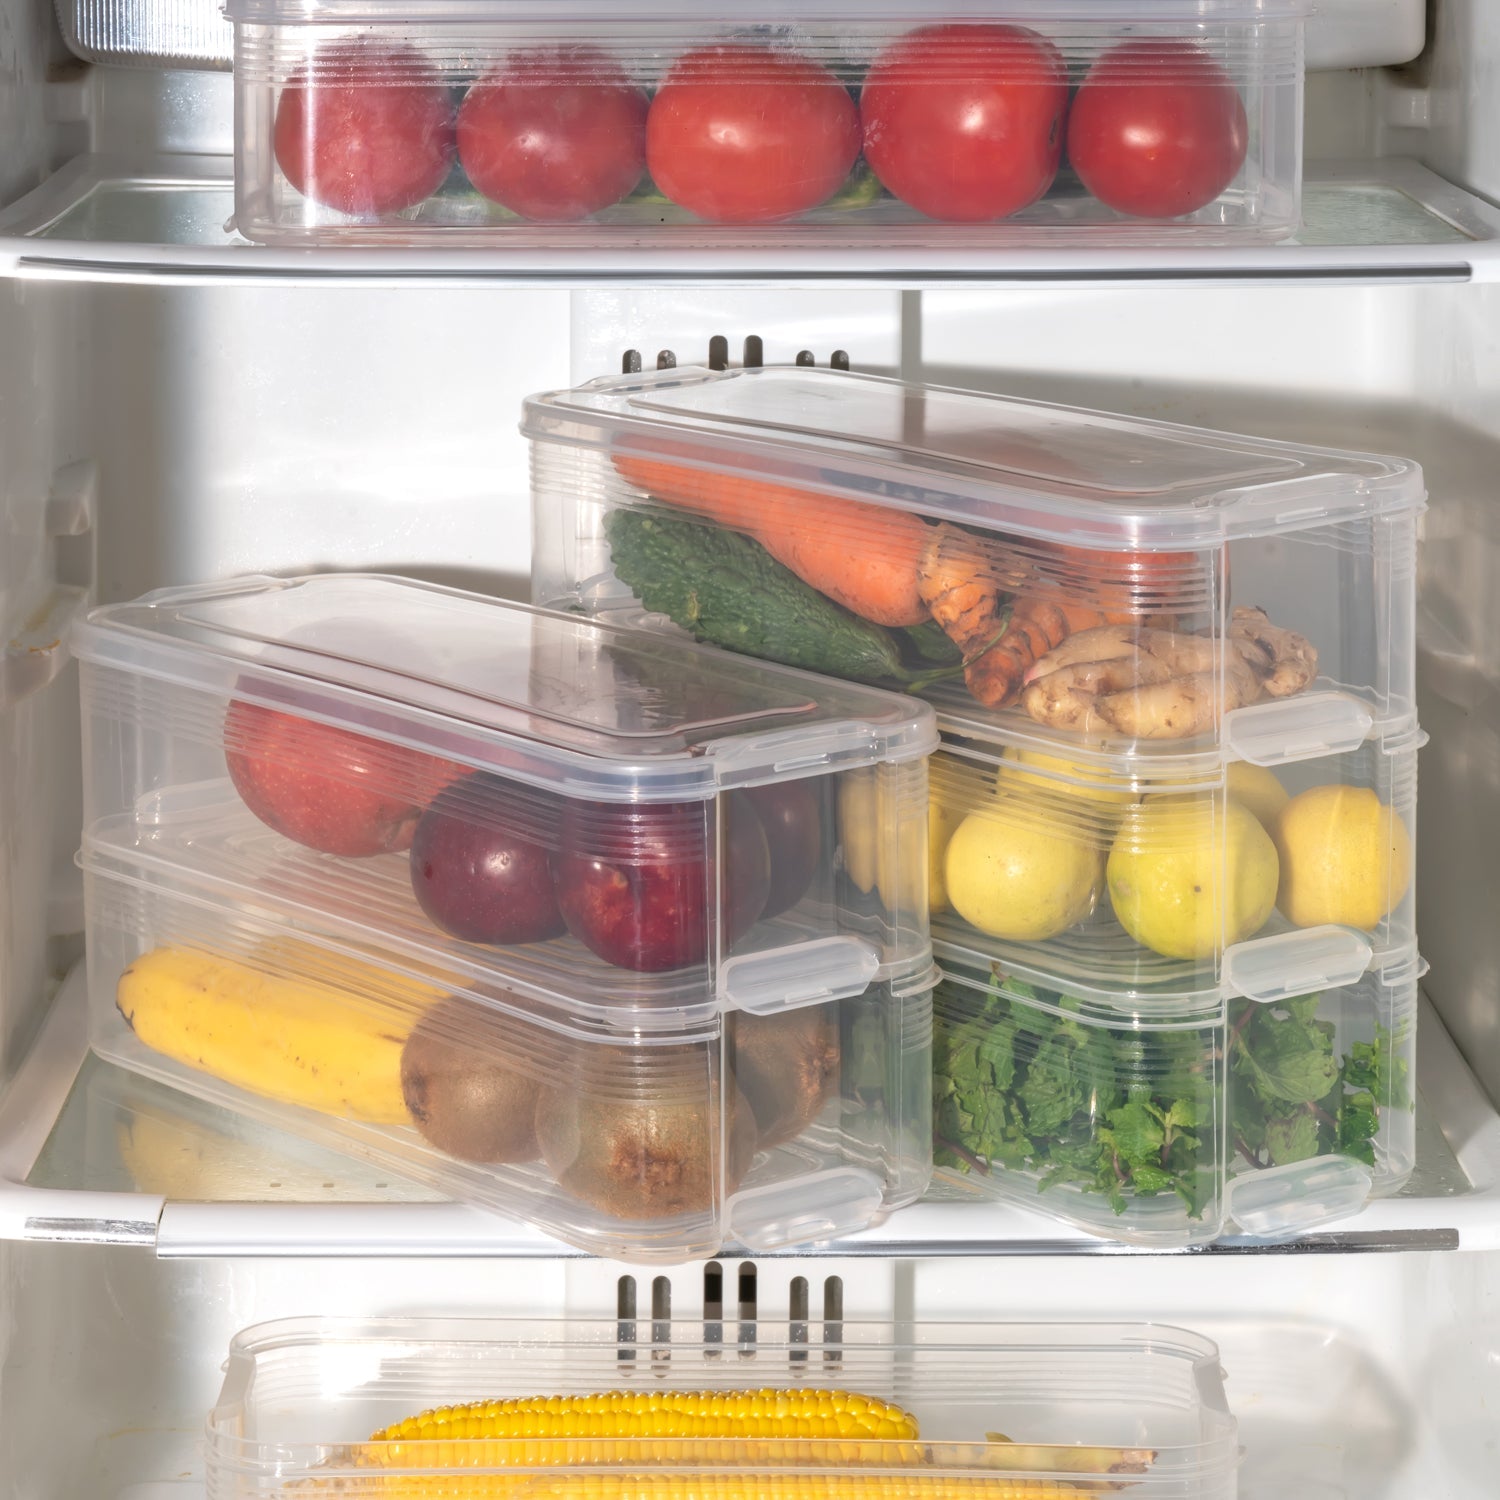 5595 3 Fridge Storage Container, Fridge Organizer with Lid Stackable Fridge Storage Containers Plastic Freezer Storage Containers for Fish, Meat, Vegetables, Fruits, Pack of 3pcs, 1500ML Approx